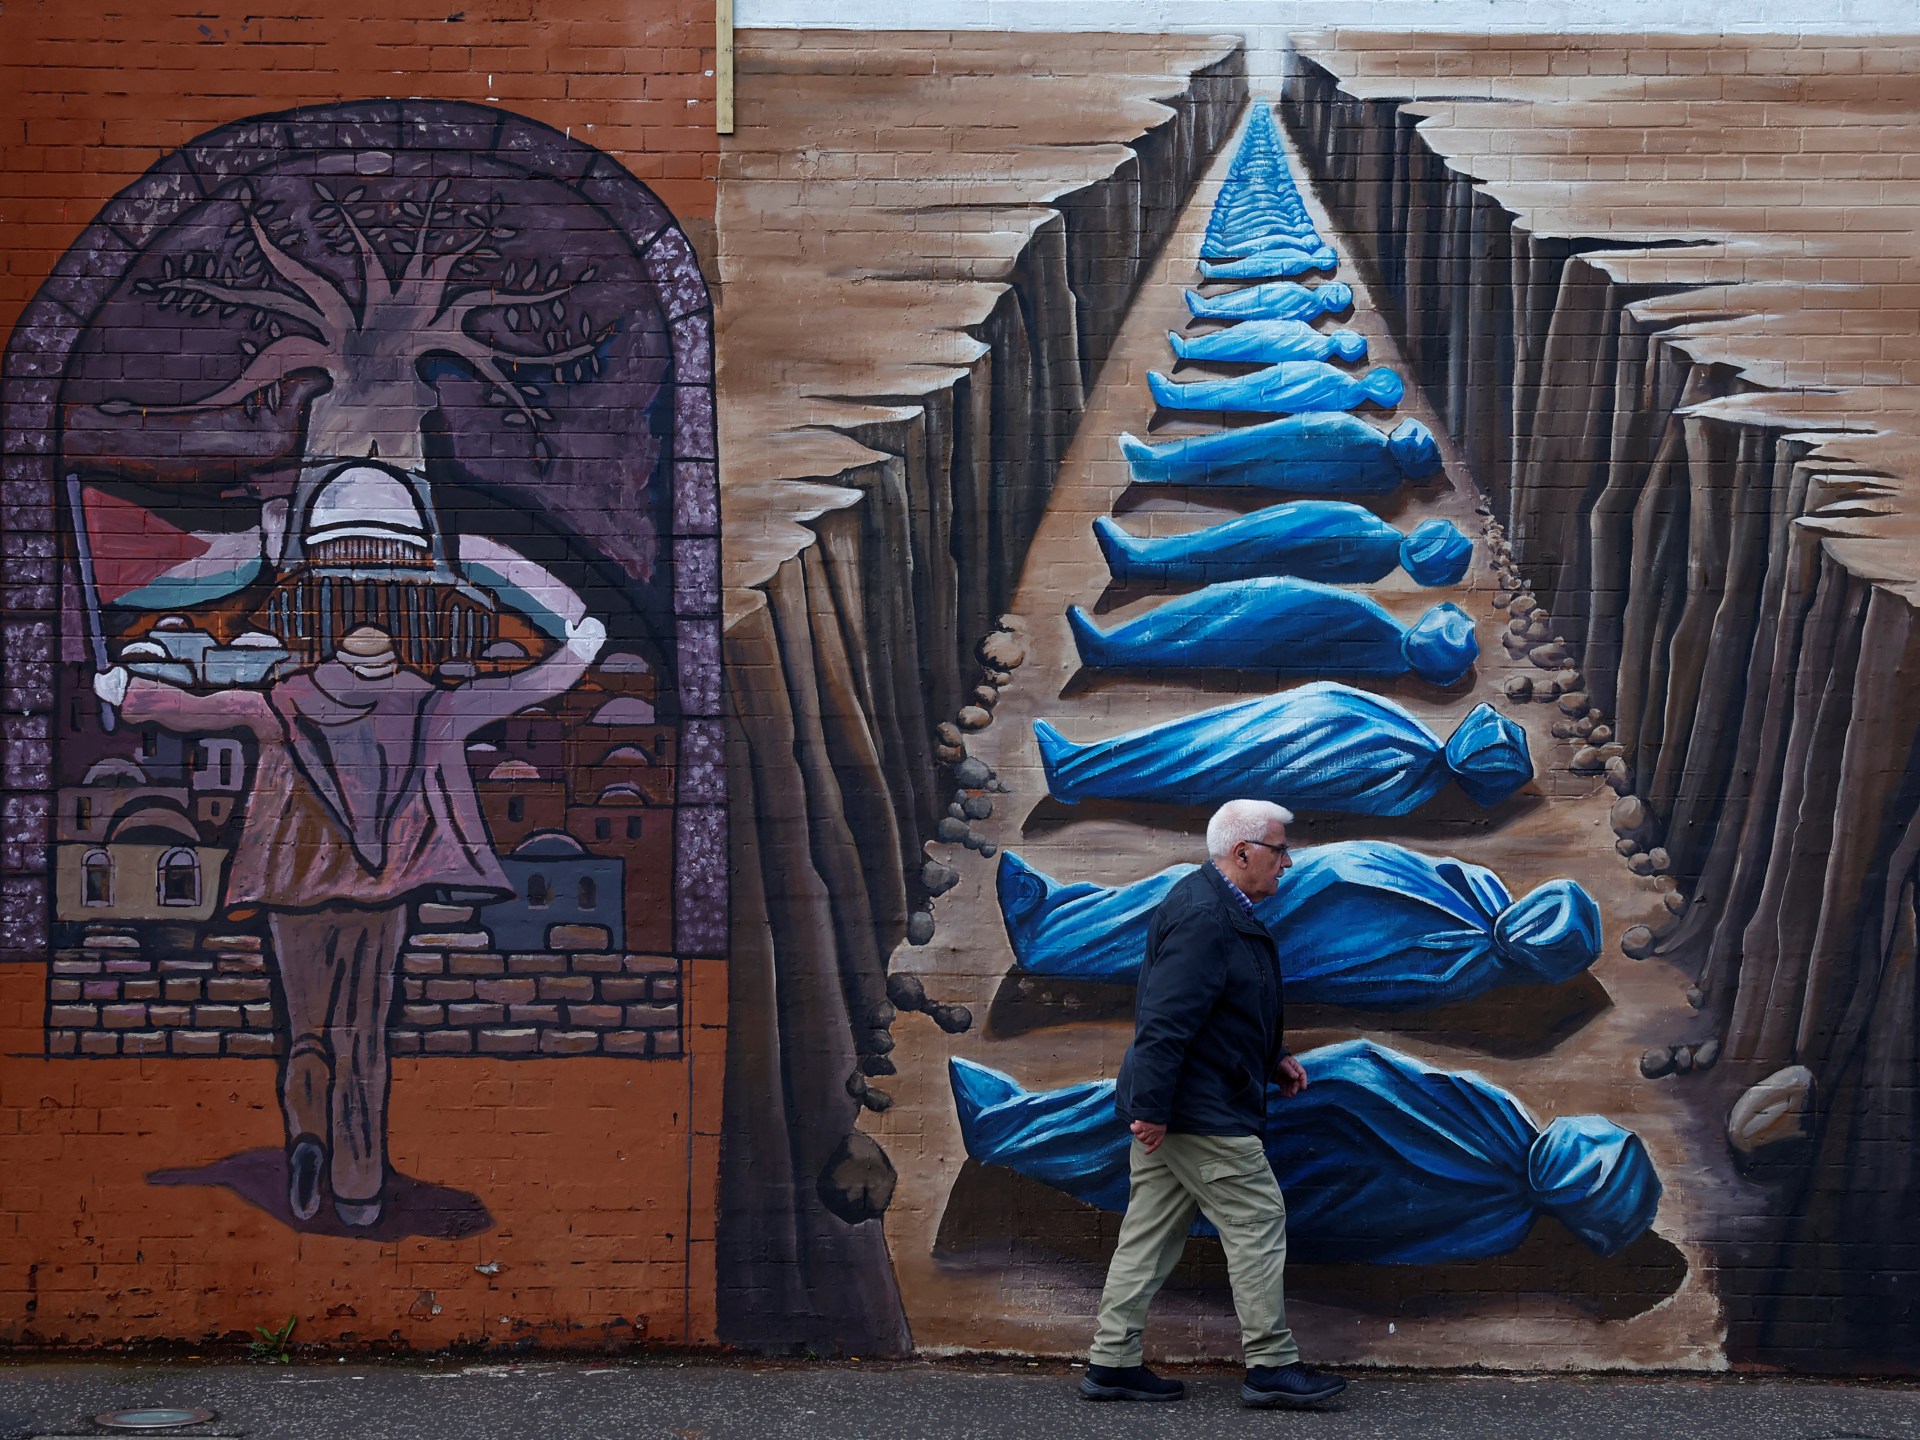 Belfast mural artists put up powerful show of solidarity with Gaza | In Pictures